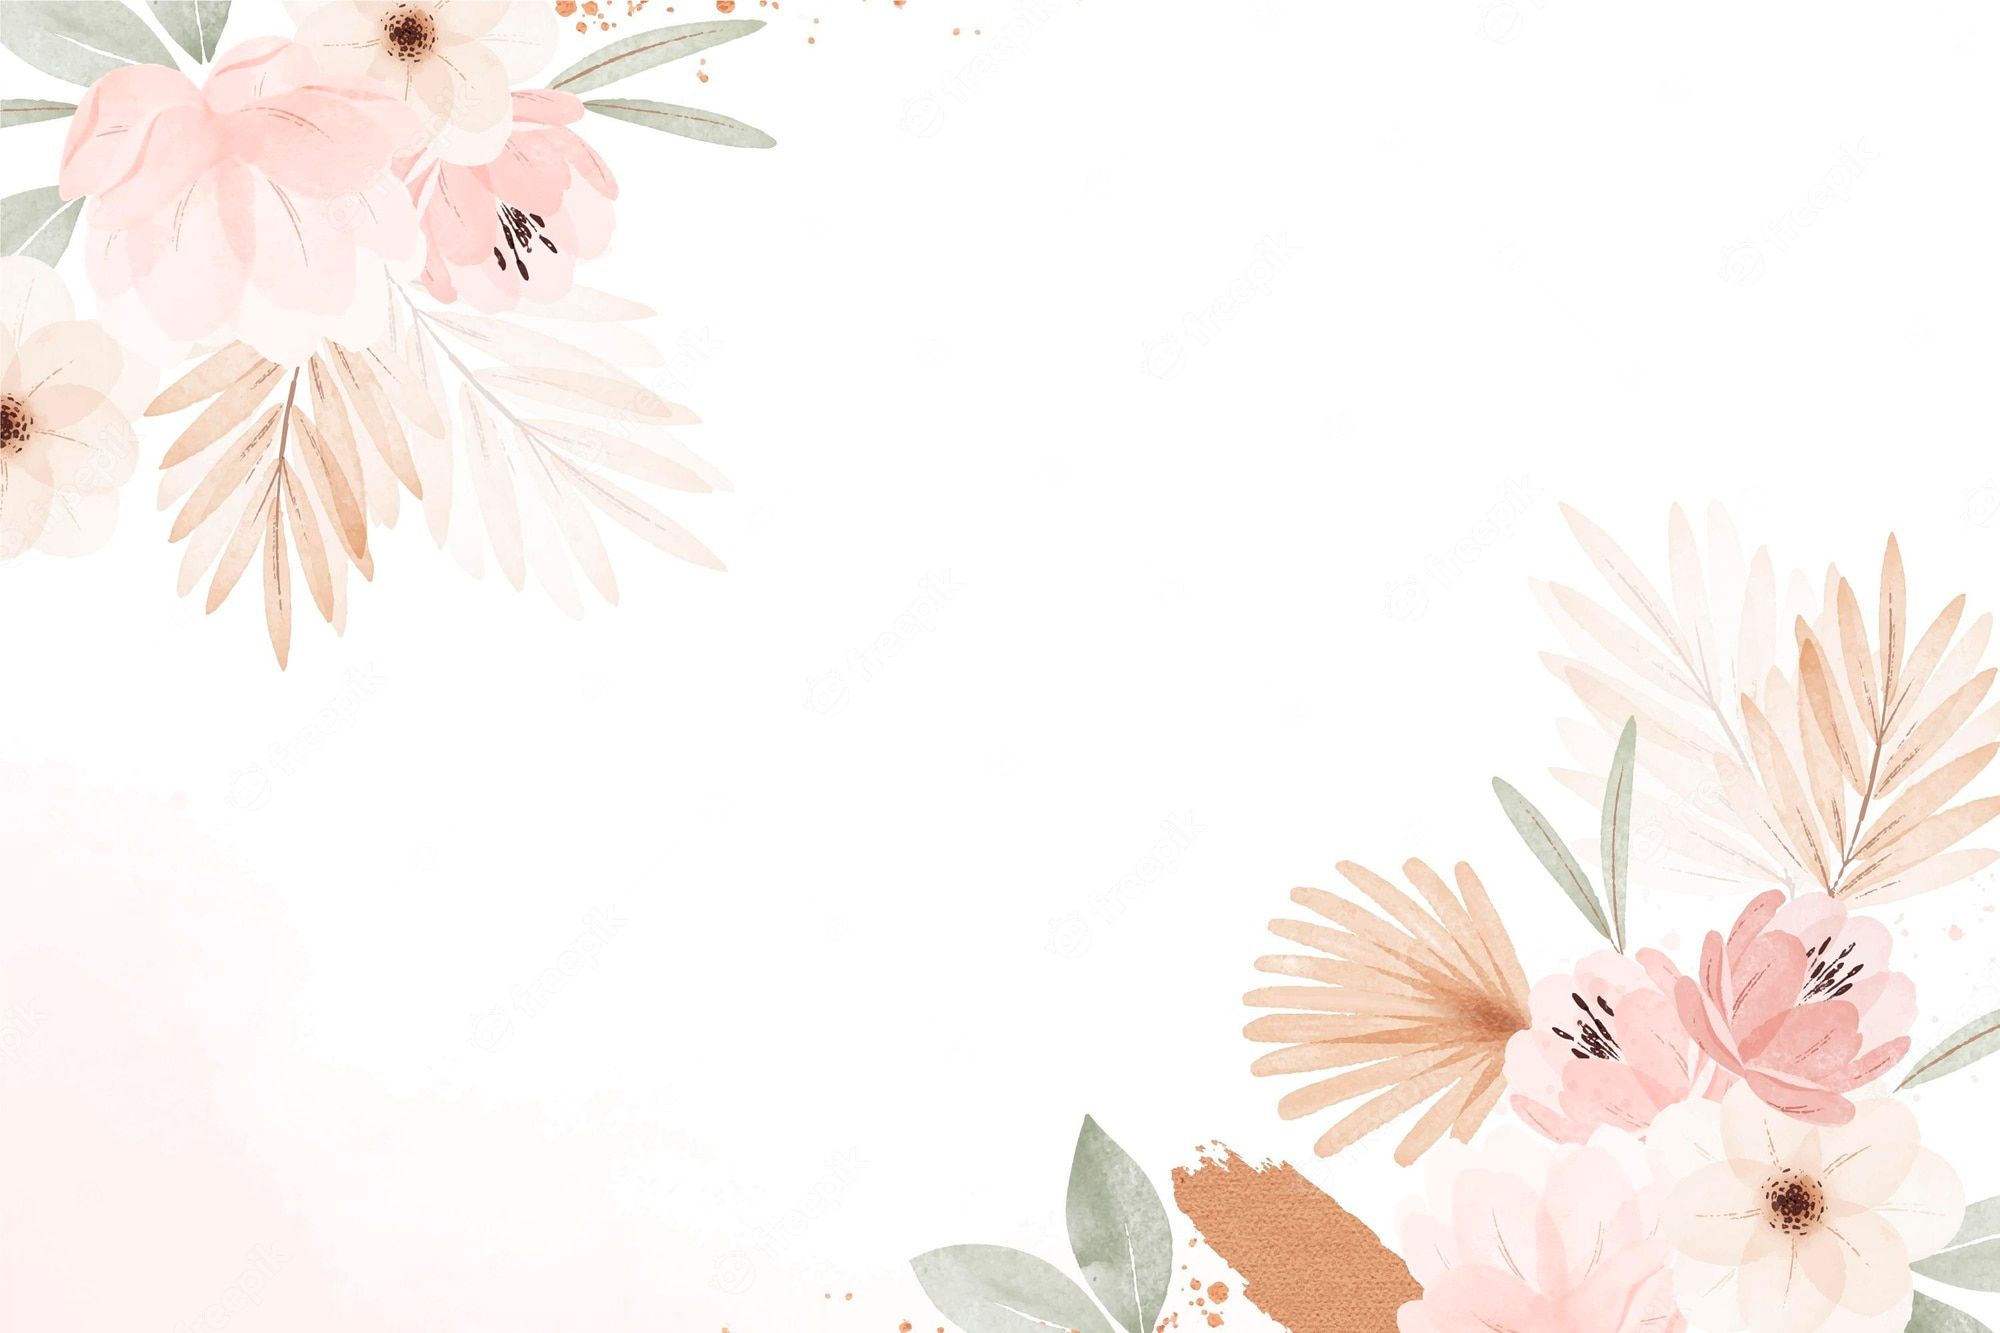 Aesthetic watercolor flowers background with a white - Boho